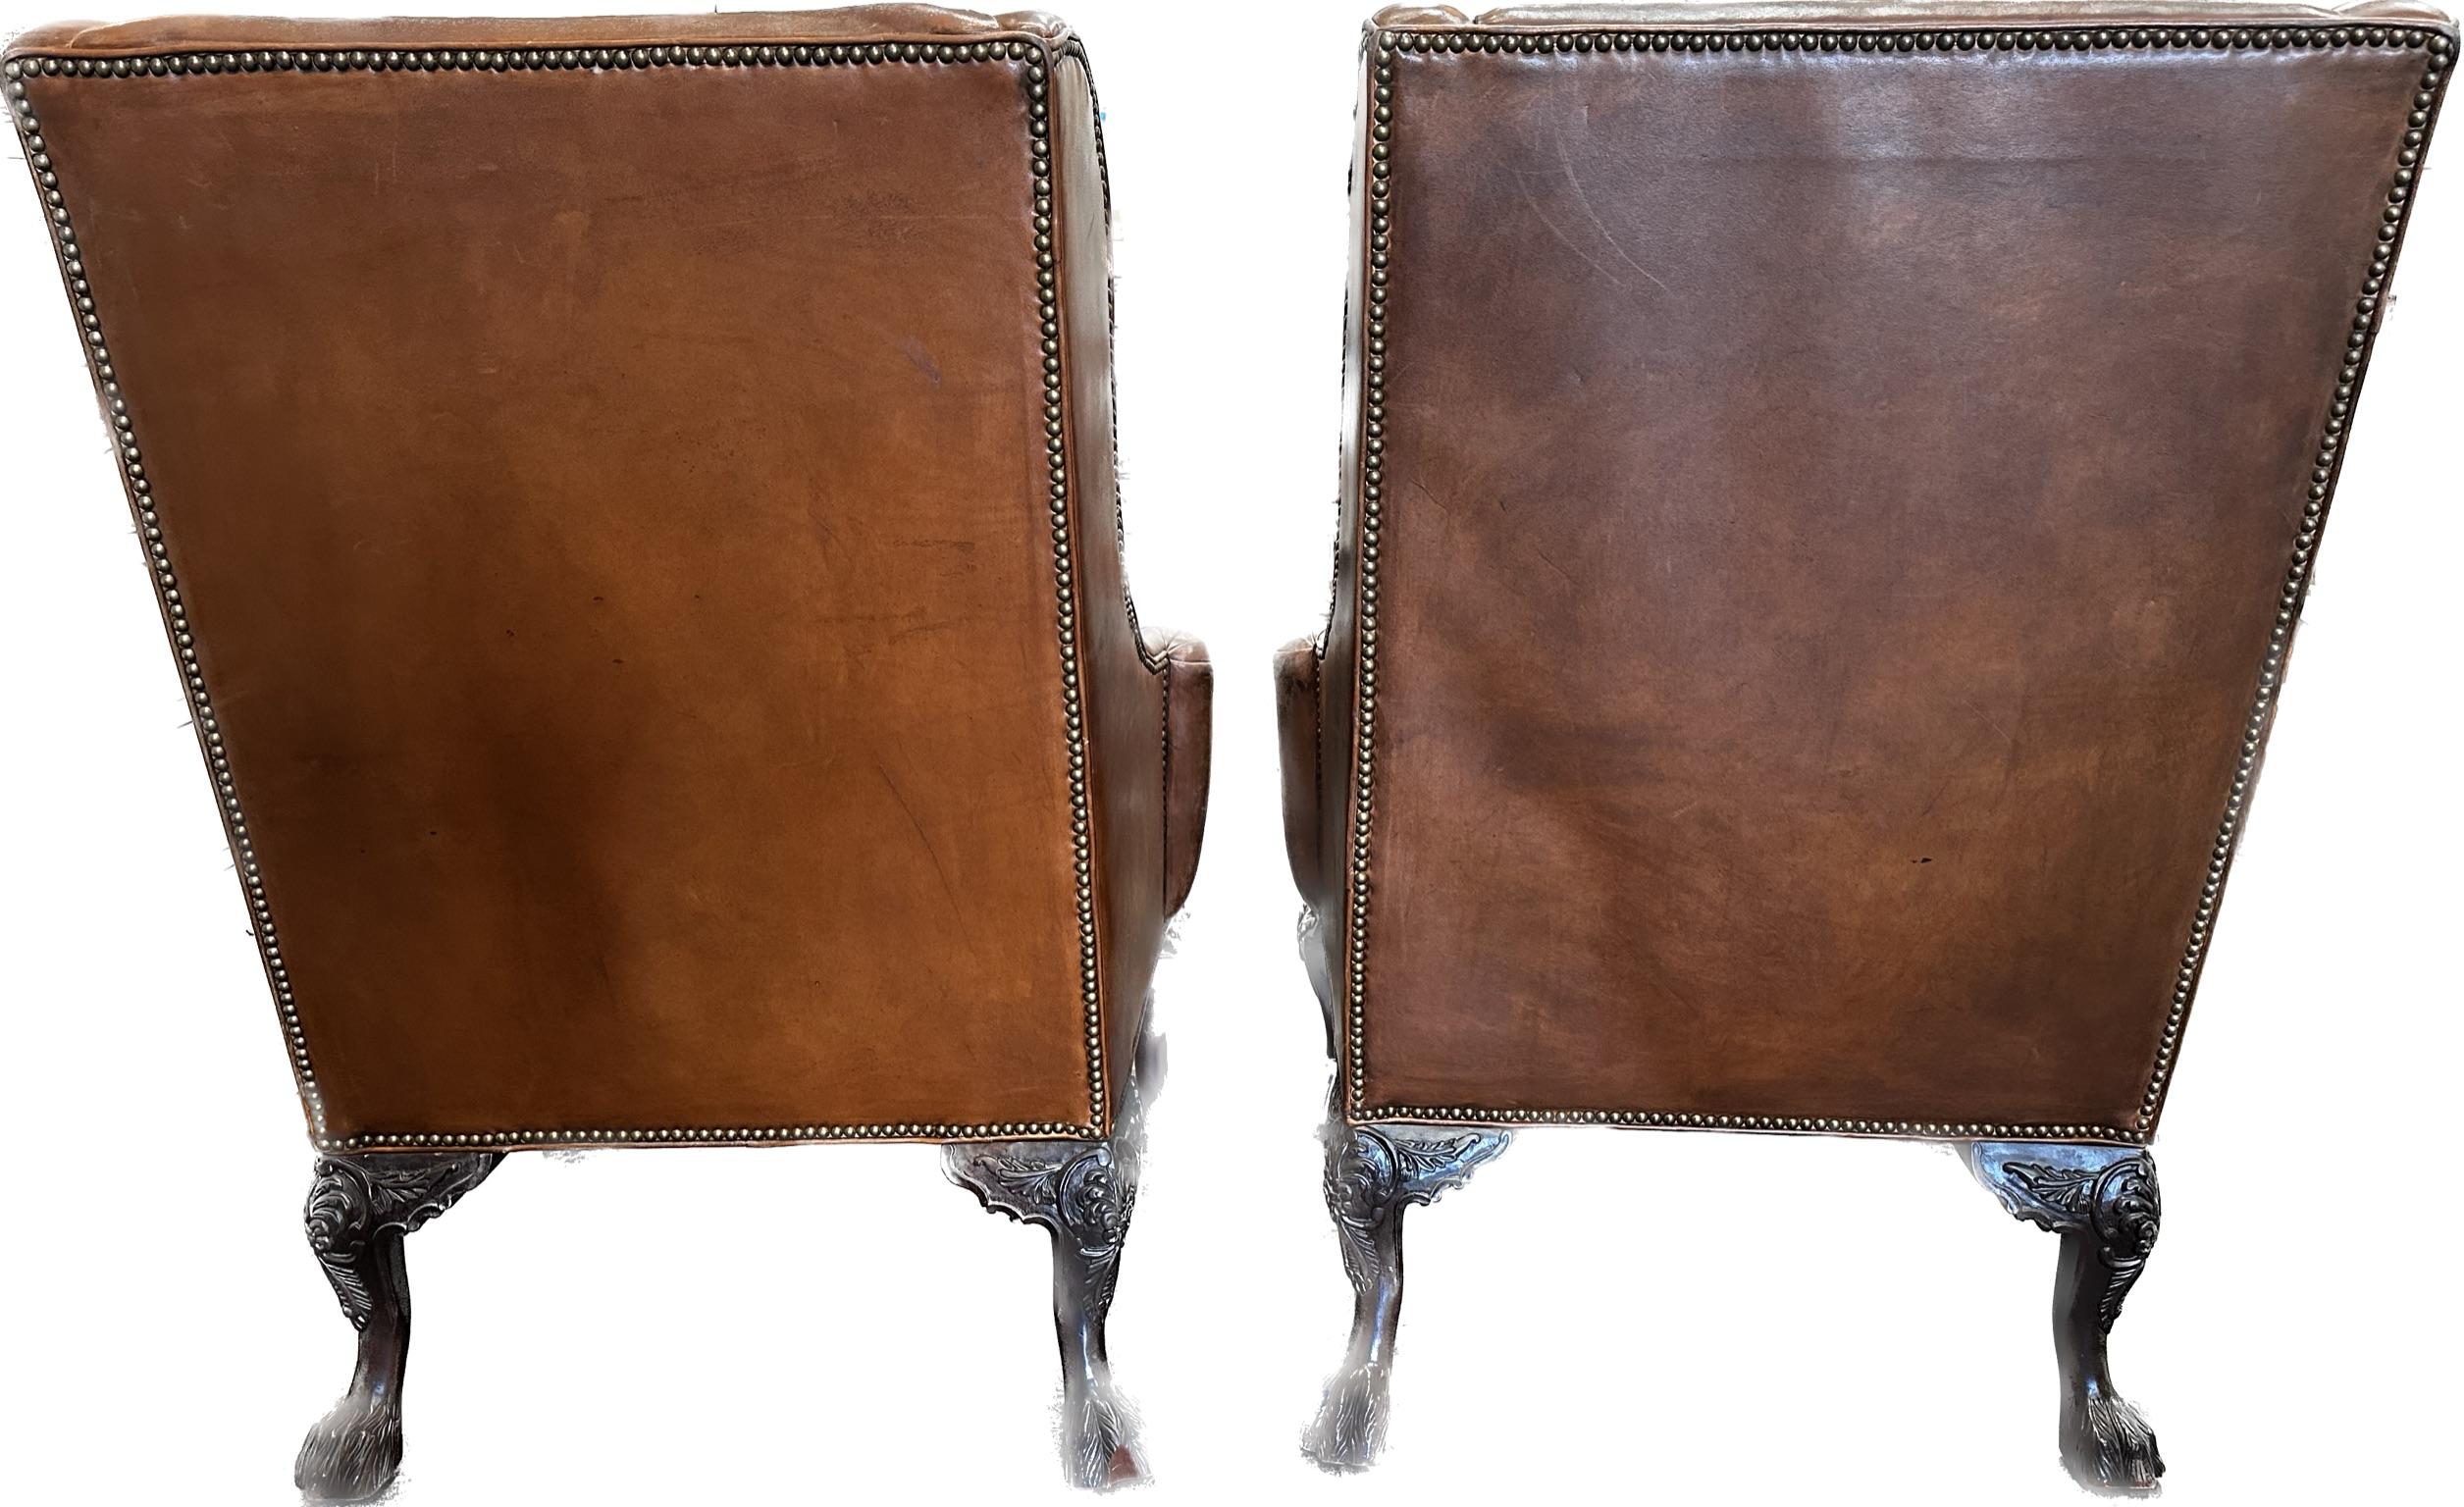 Pair of Vintage Henredon brown leather wingback armchairs, USA, circa 1970-1980 Well-built and well-known, Henredon armchairs have stood the test of time.  Sold in Vintage condition, these chairs are extremely comfortable and have the look of aged